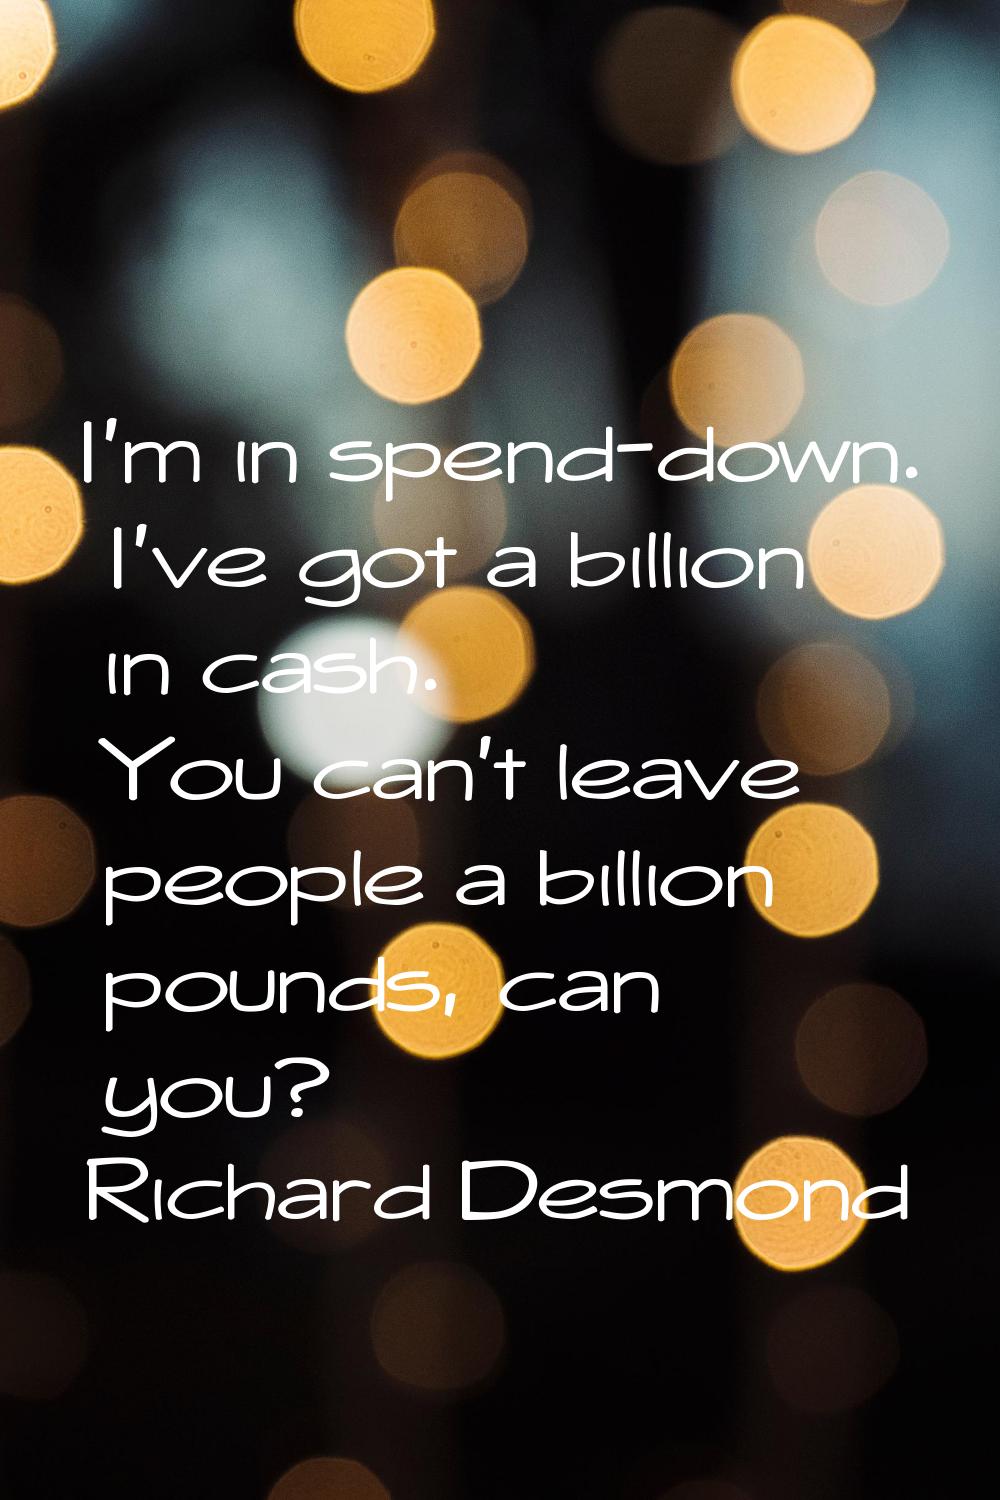 I'm in spend-down. I've got a billion in cash. You can't leave people a billion pounds, can you?